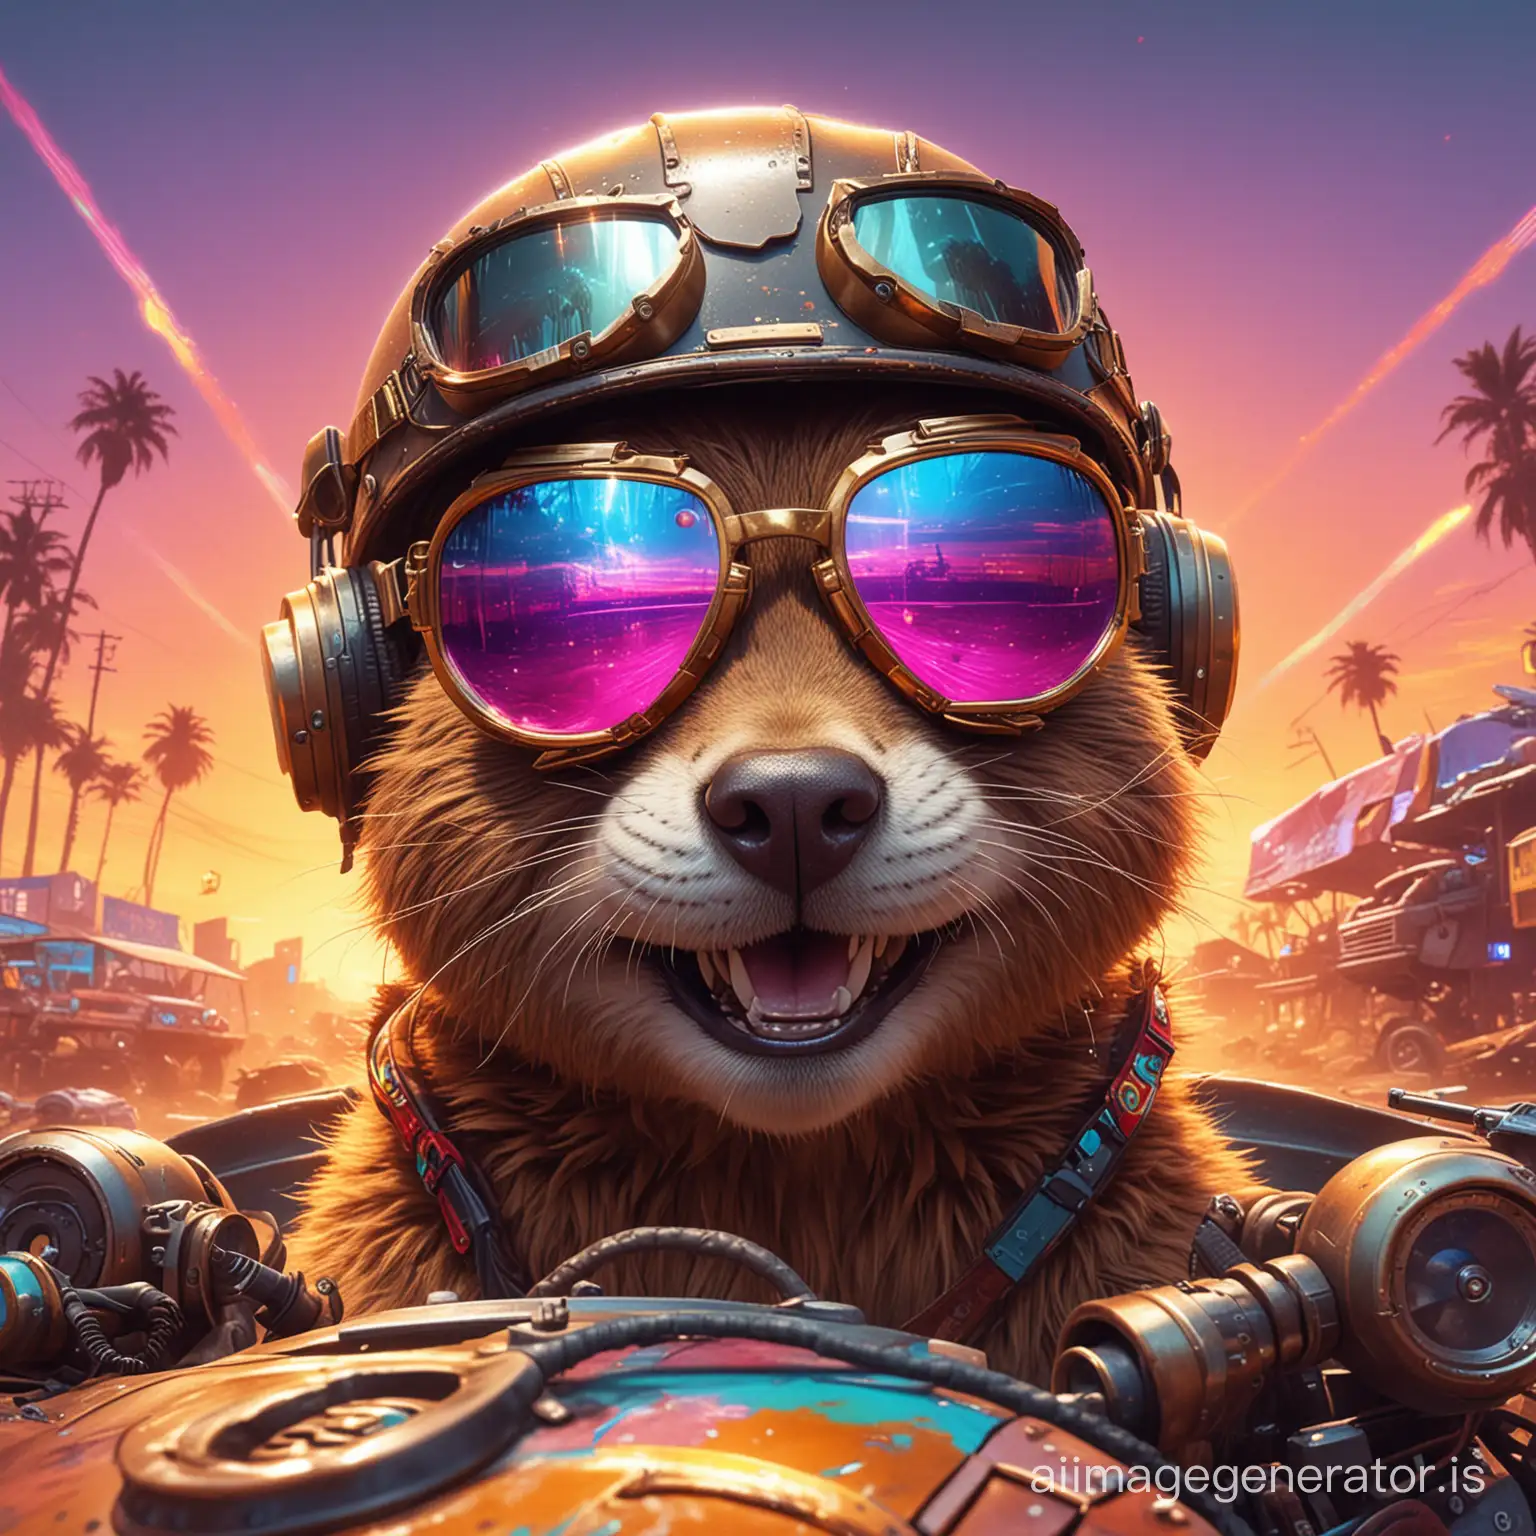 Cyberpunk-Beaver-with-Retro-Racer-Goggles-and-Psychedelic-Background